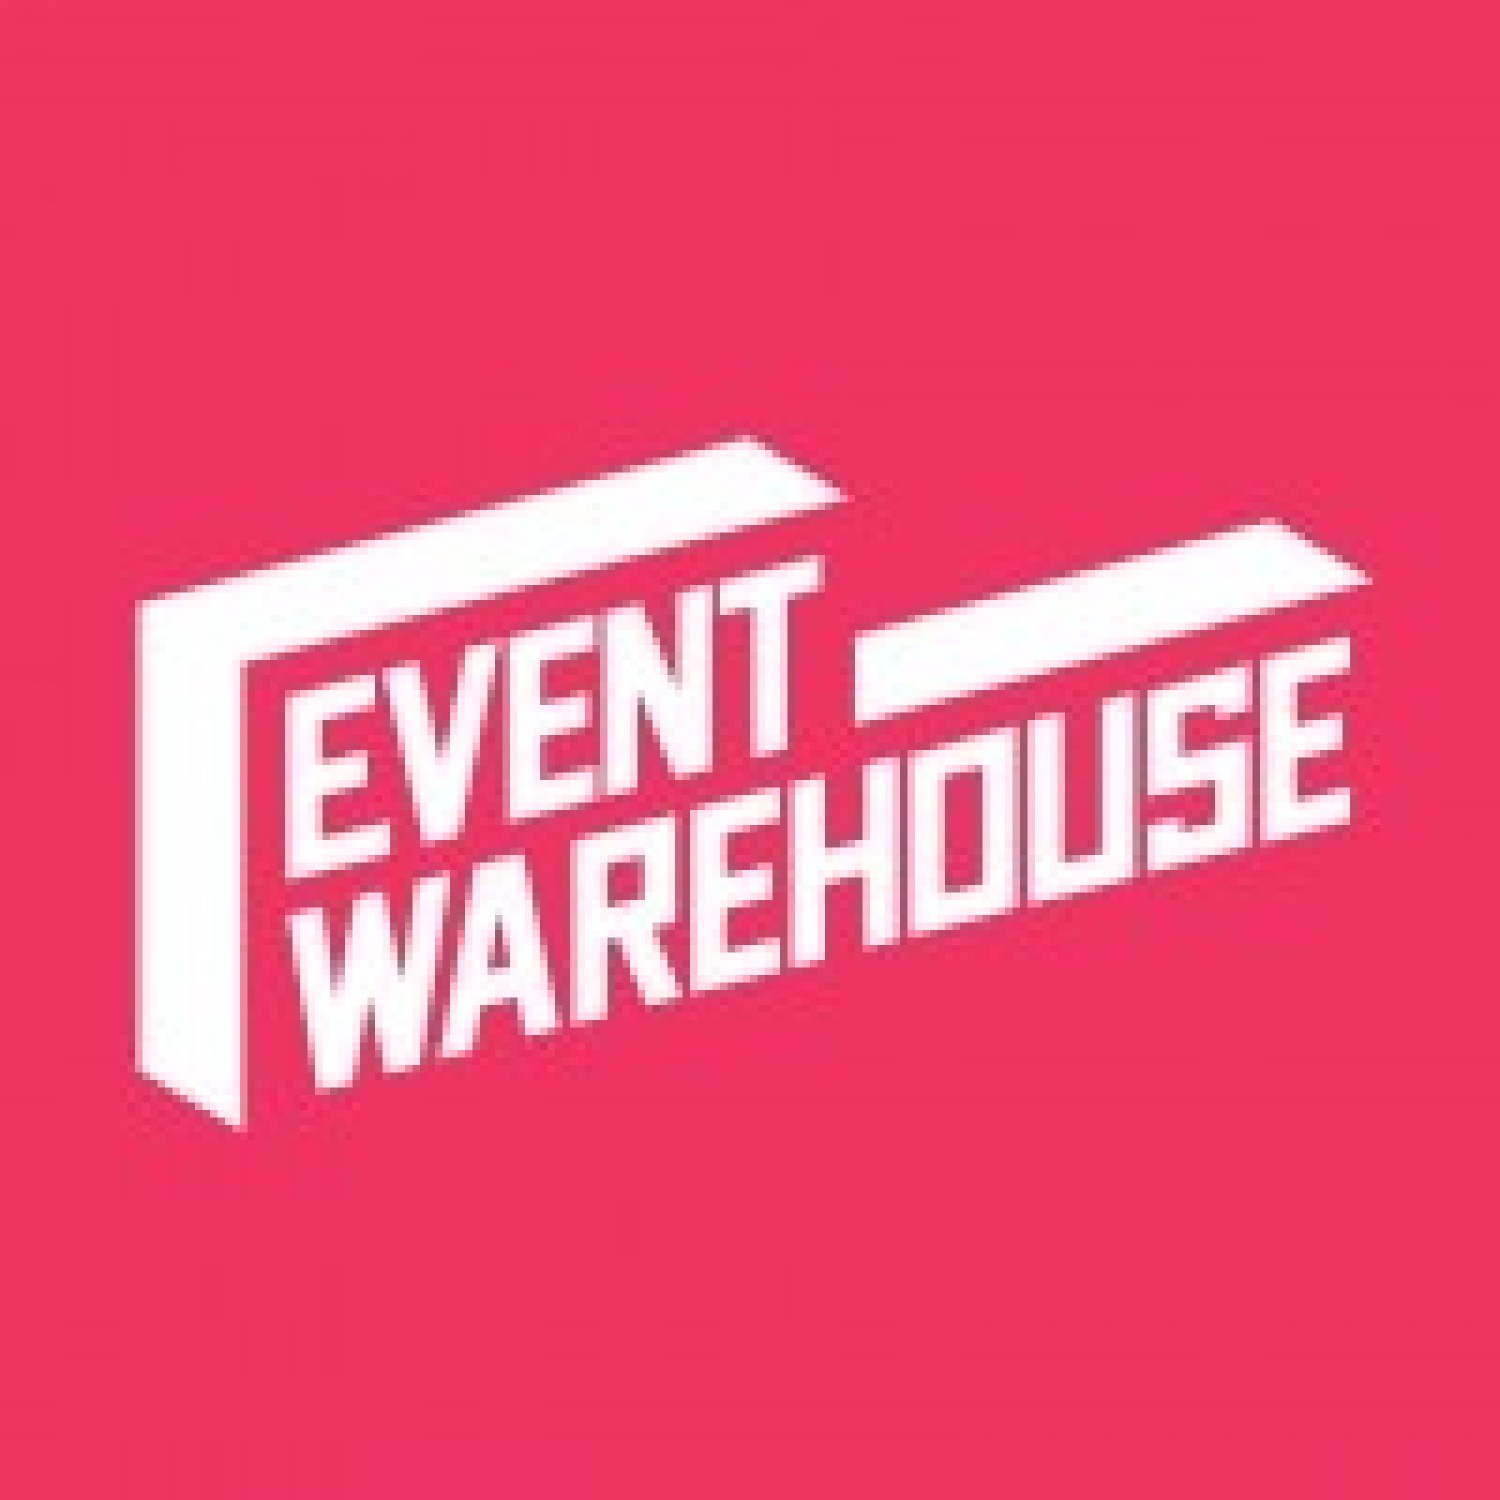 The Event Warehouse